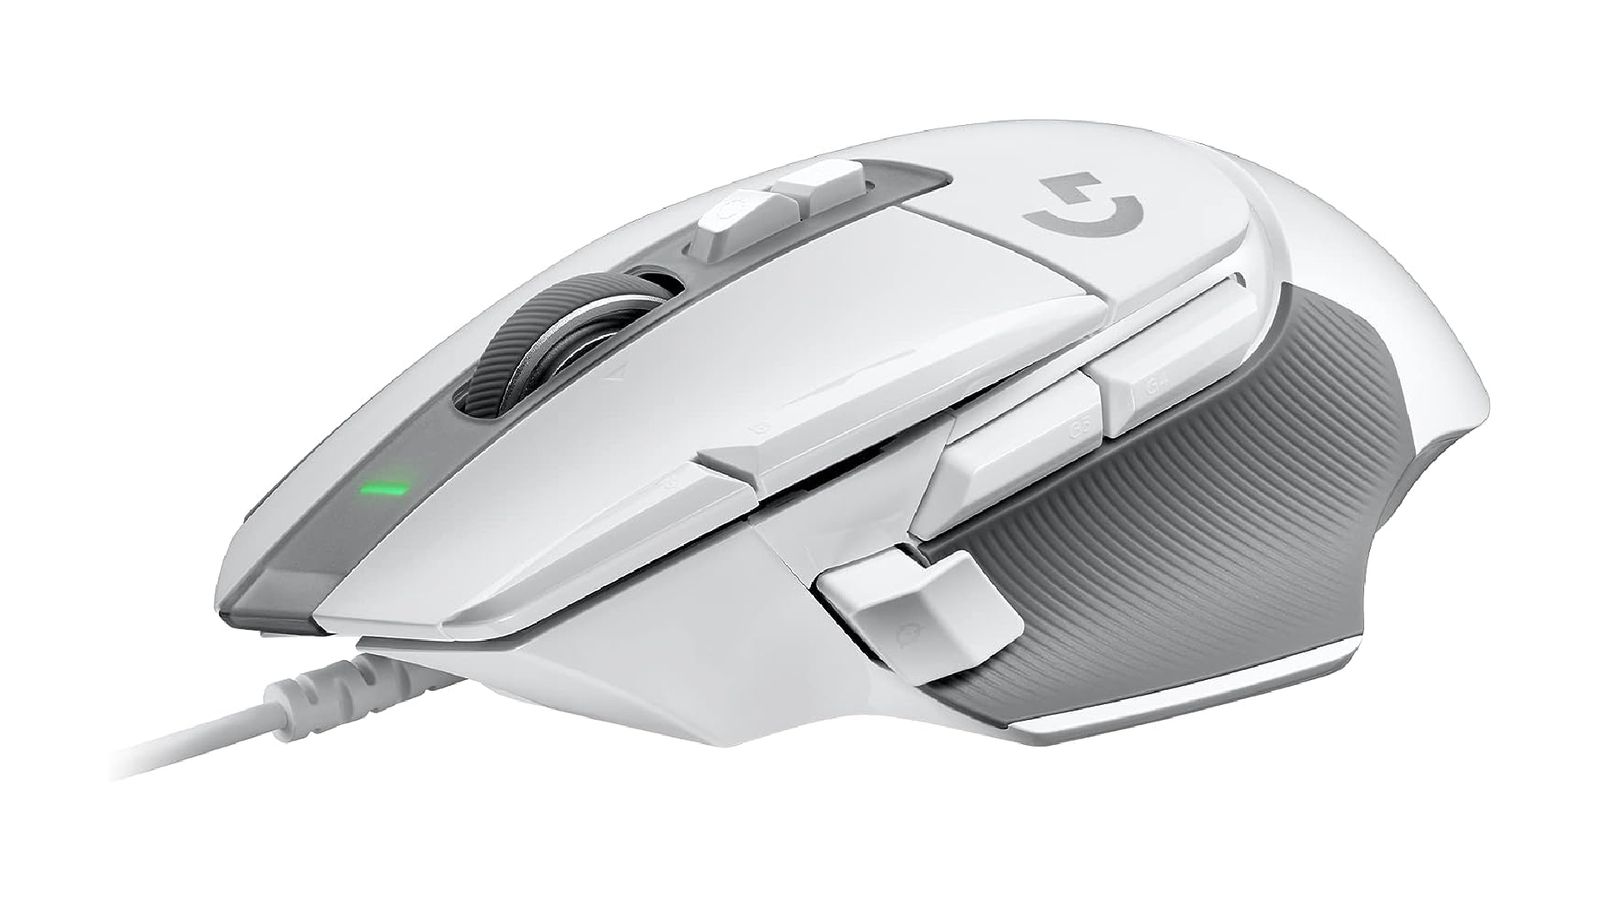 Logitech G502 X product image of a white wired mouse featuring grey details and Logitech branding.